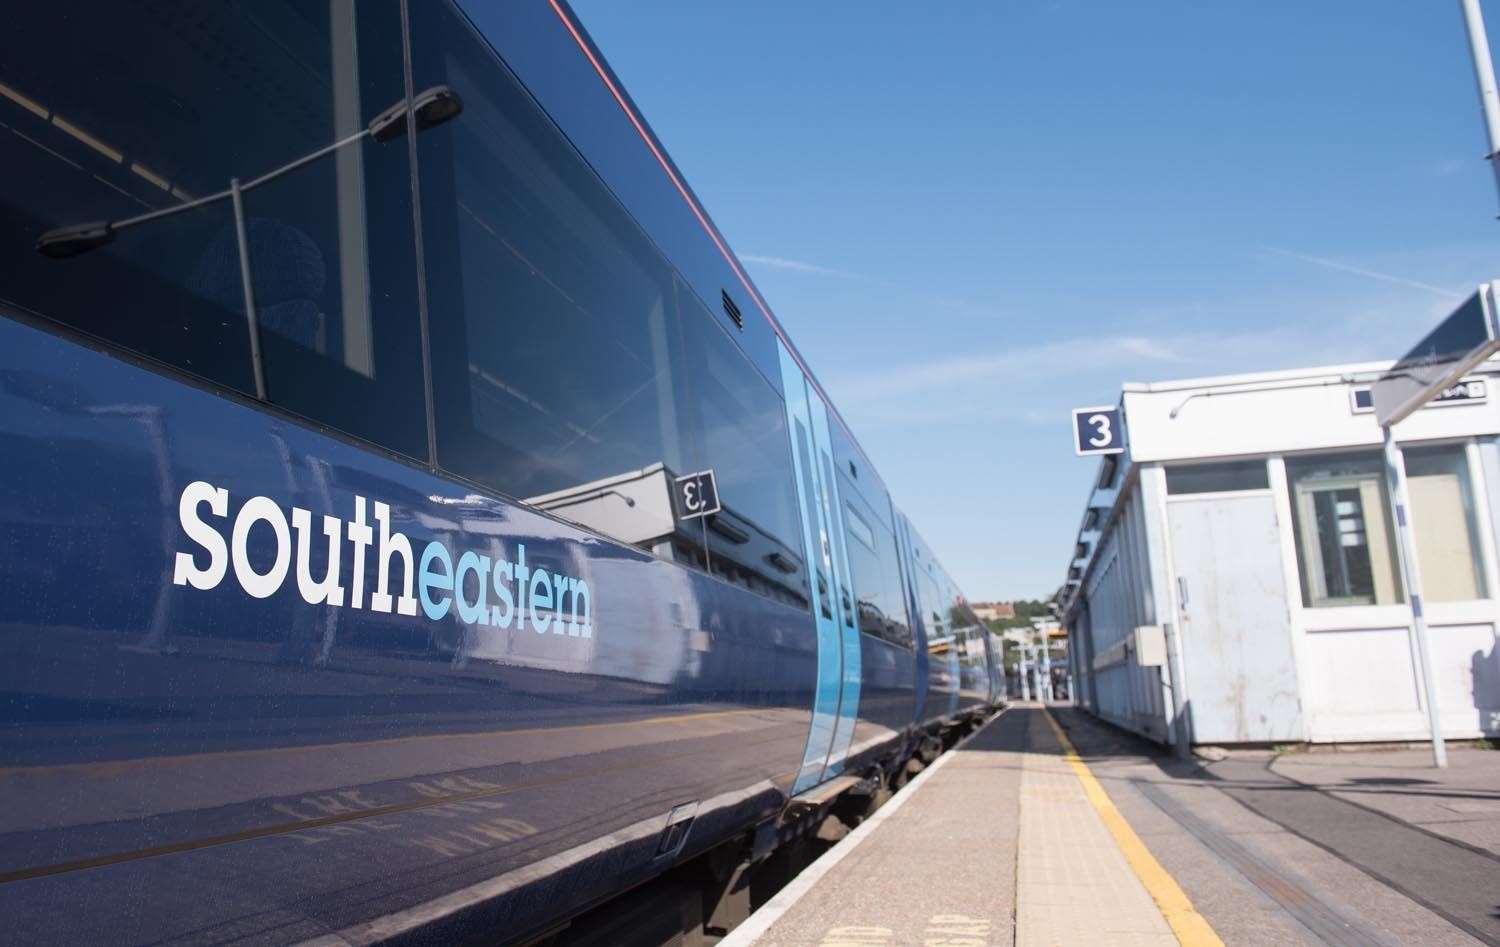 Southeastern services between Sittingbourne and Sheerness are currently on hold